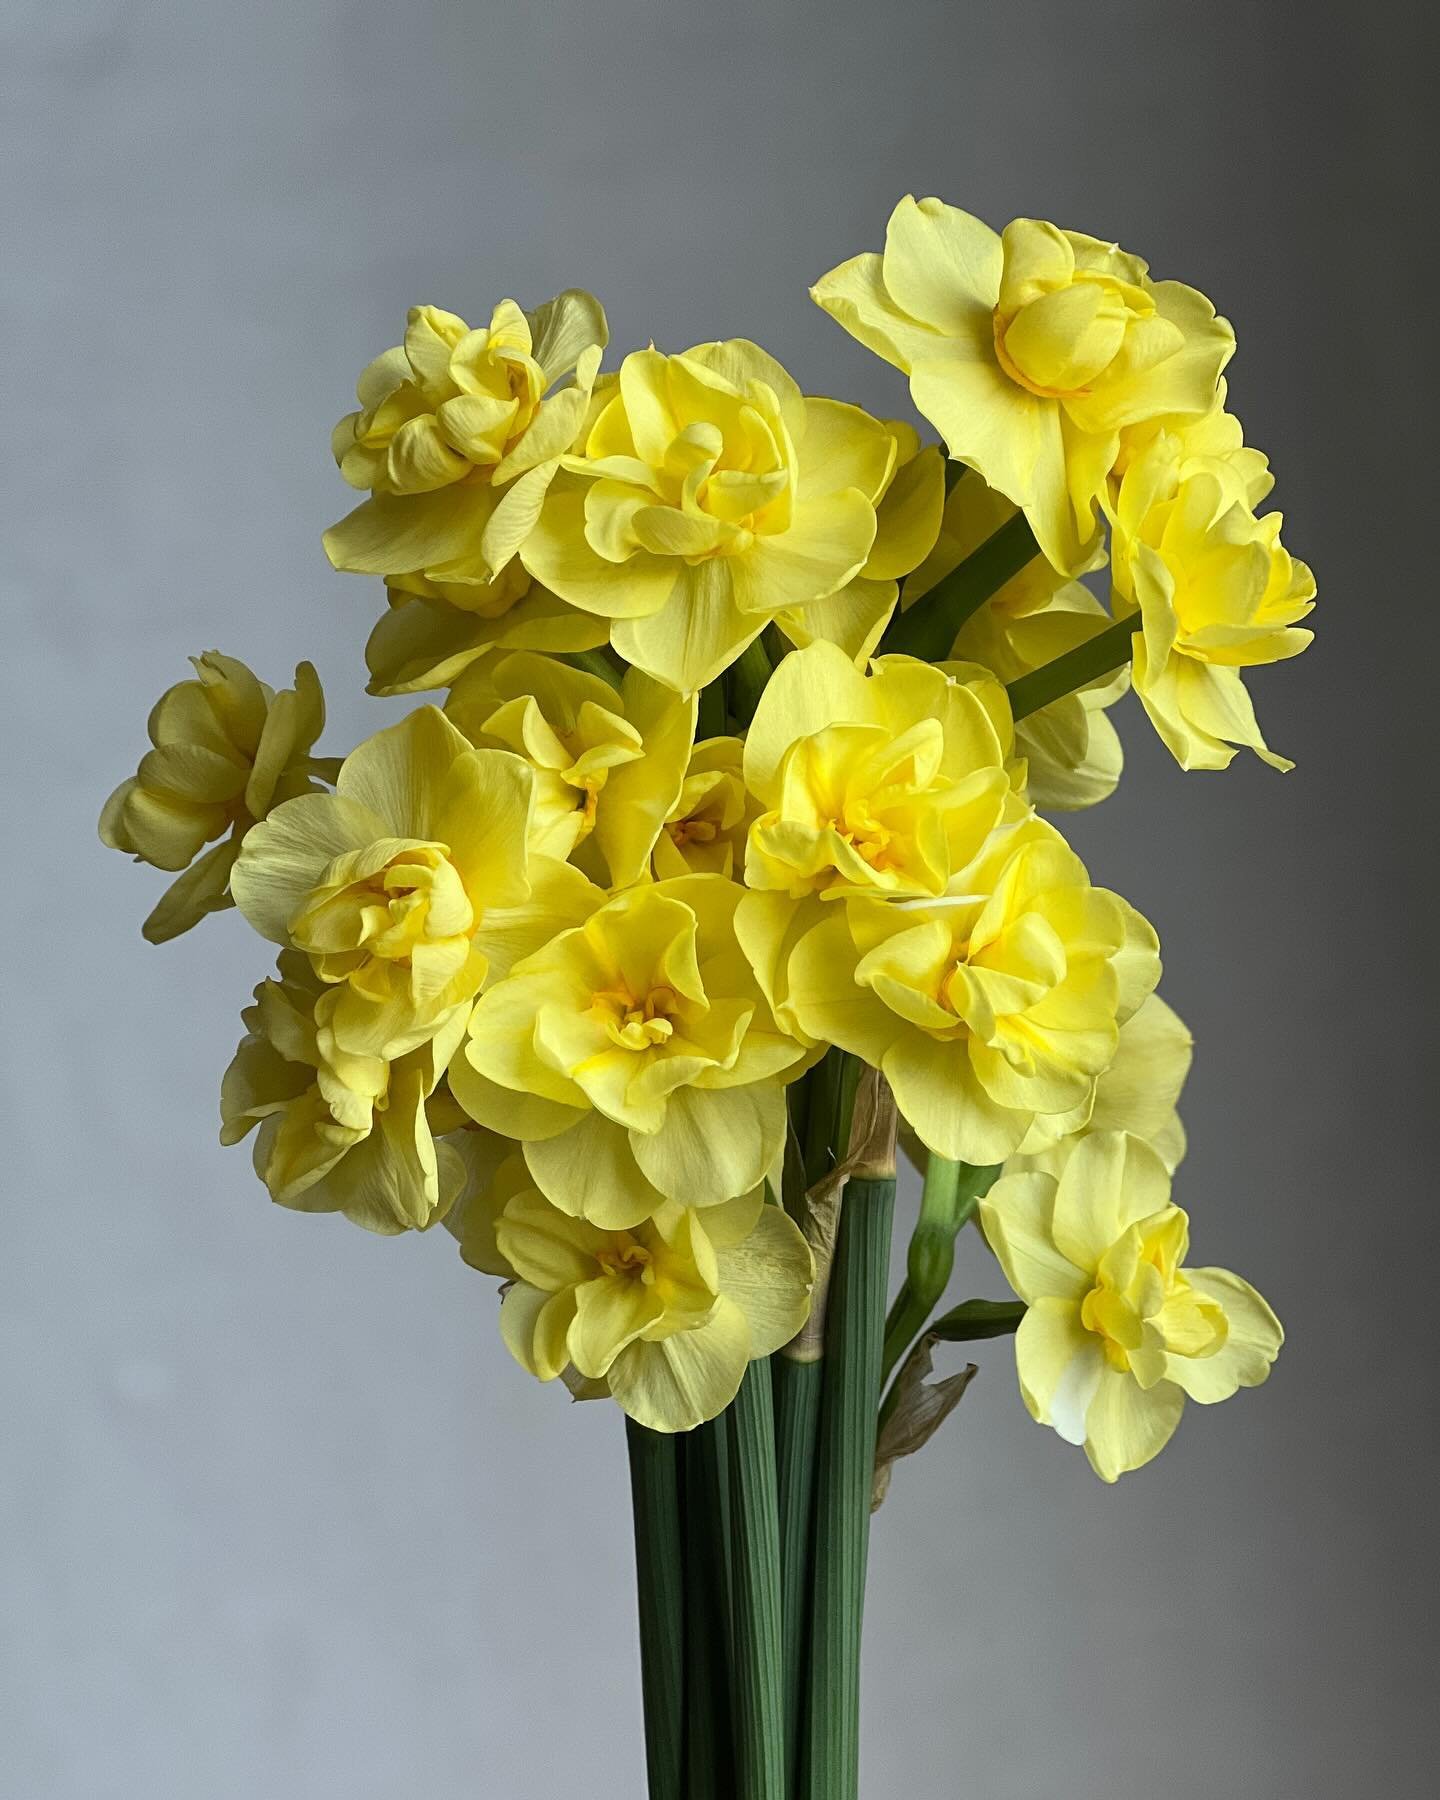 Hello, Flower Friends! A gentle reminder that this is the last day for Mother&rsquo;s Day pre-orders. We&rsquo;ll be tucking some of these sweet fragrant Yellow Cheerfulness daffodils into the bouquets! 

There are 2 links in our bio for pre-ordering